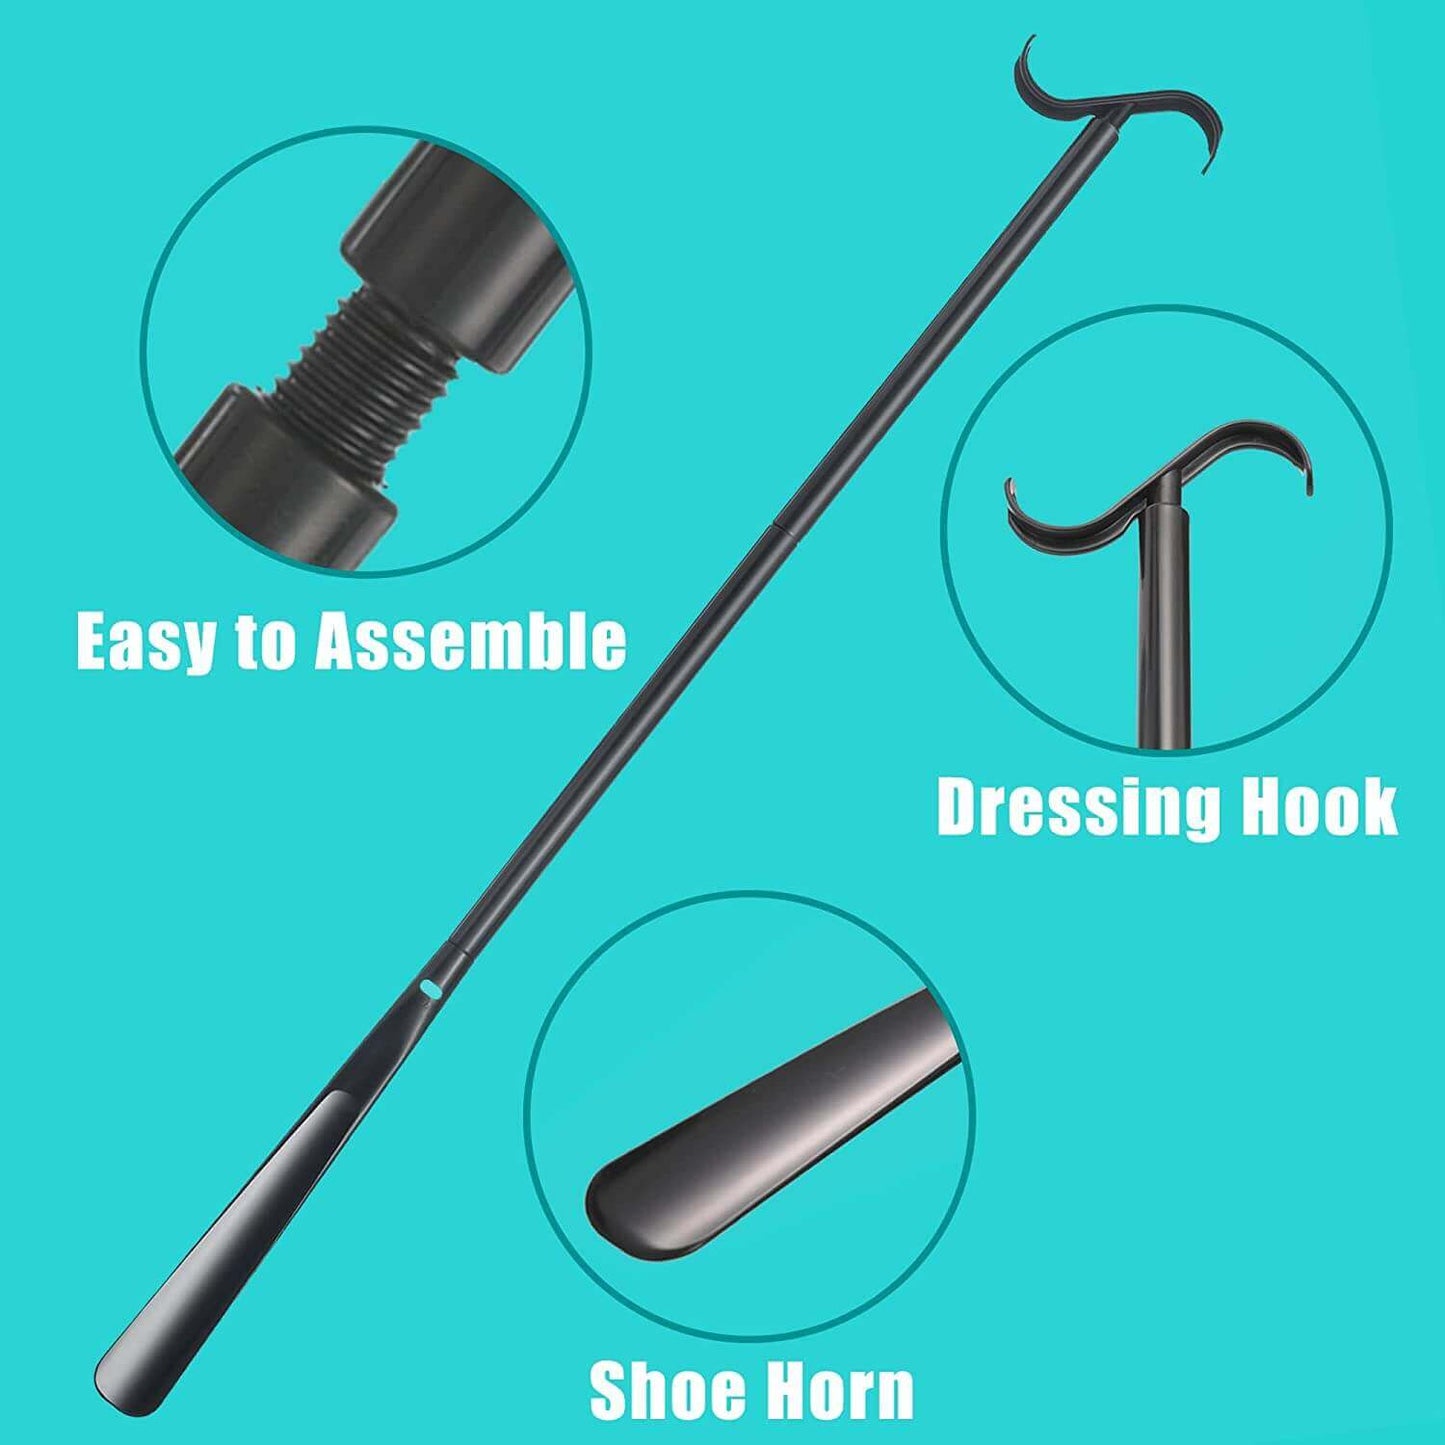 Fanwer Long-Handle Shoe Horn Dressing Stick Sock Remover for Seniors, dismantled product and parts details